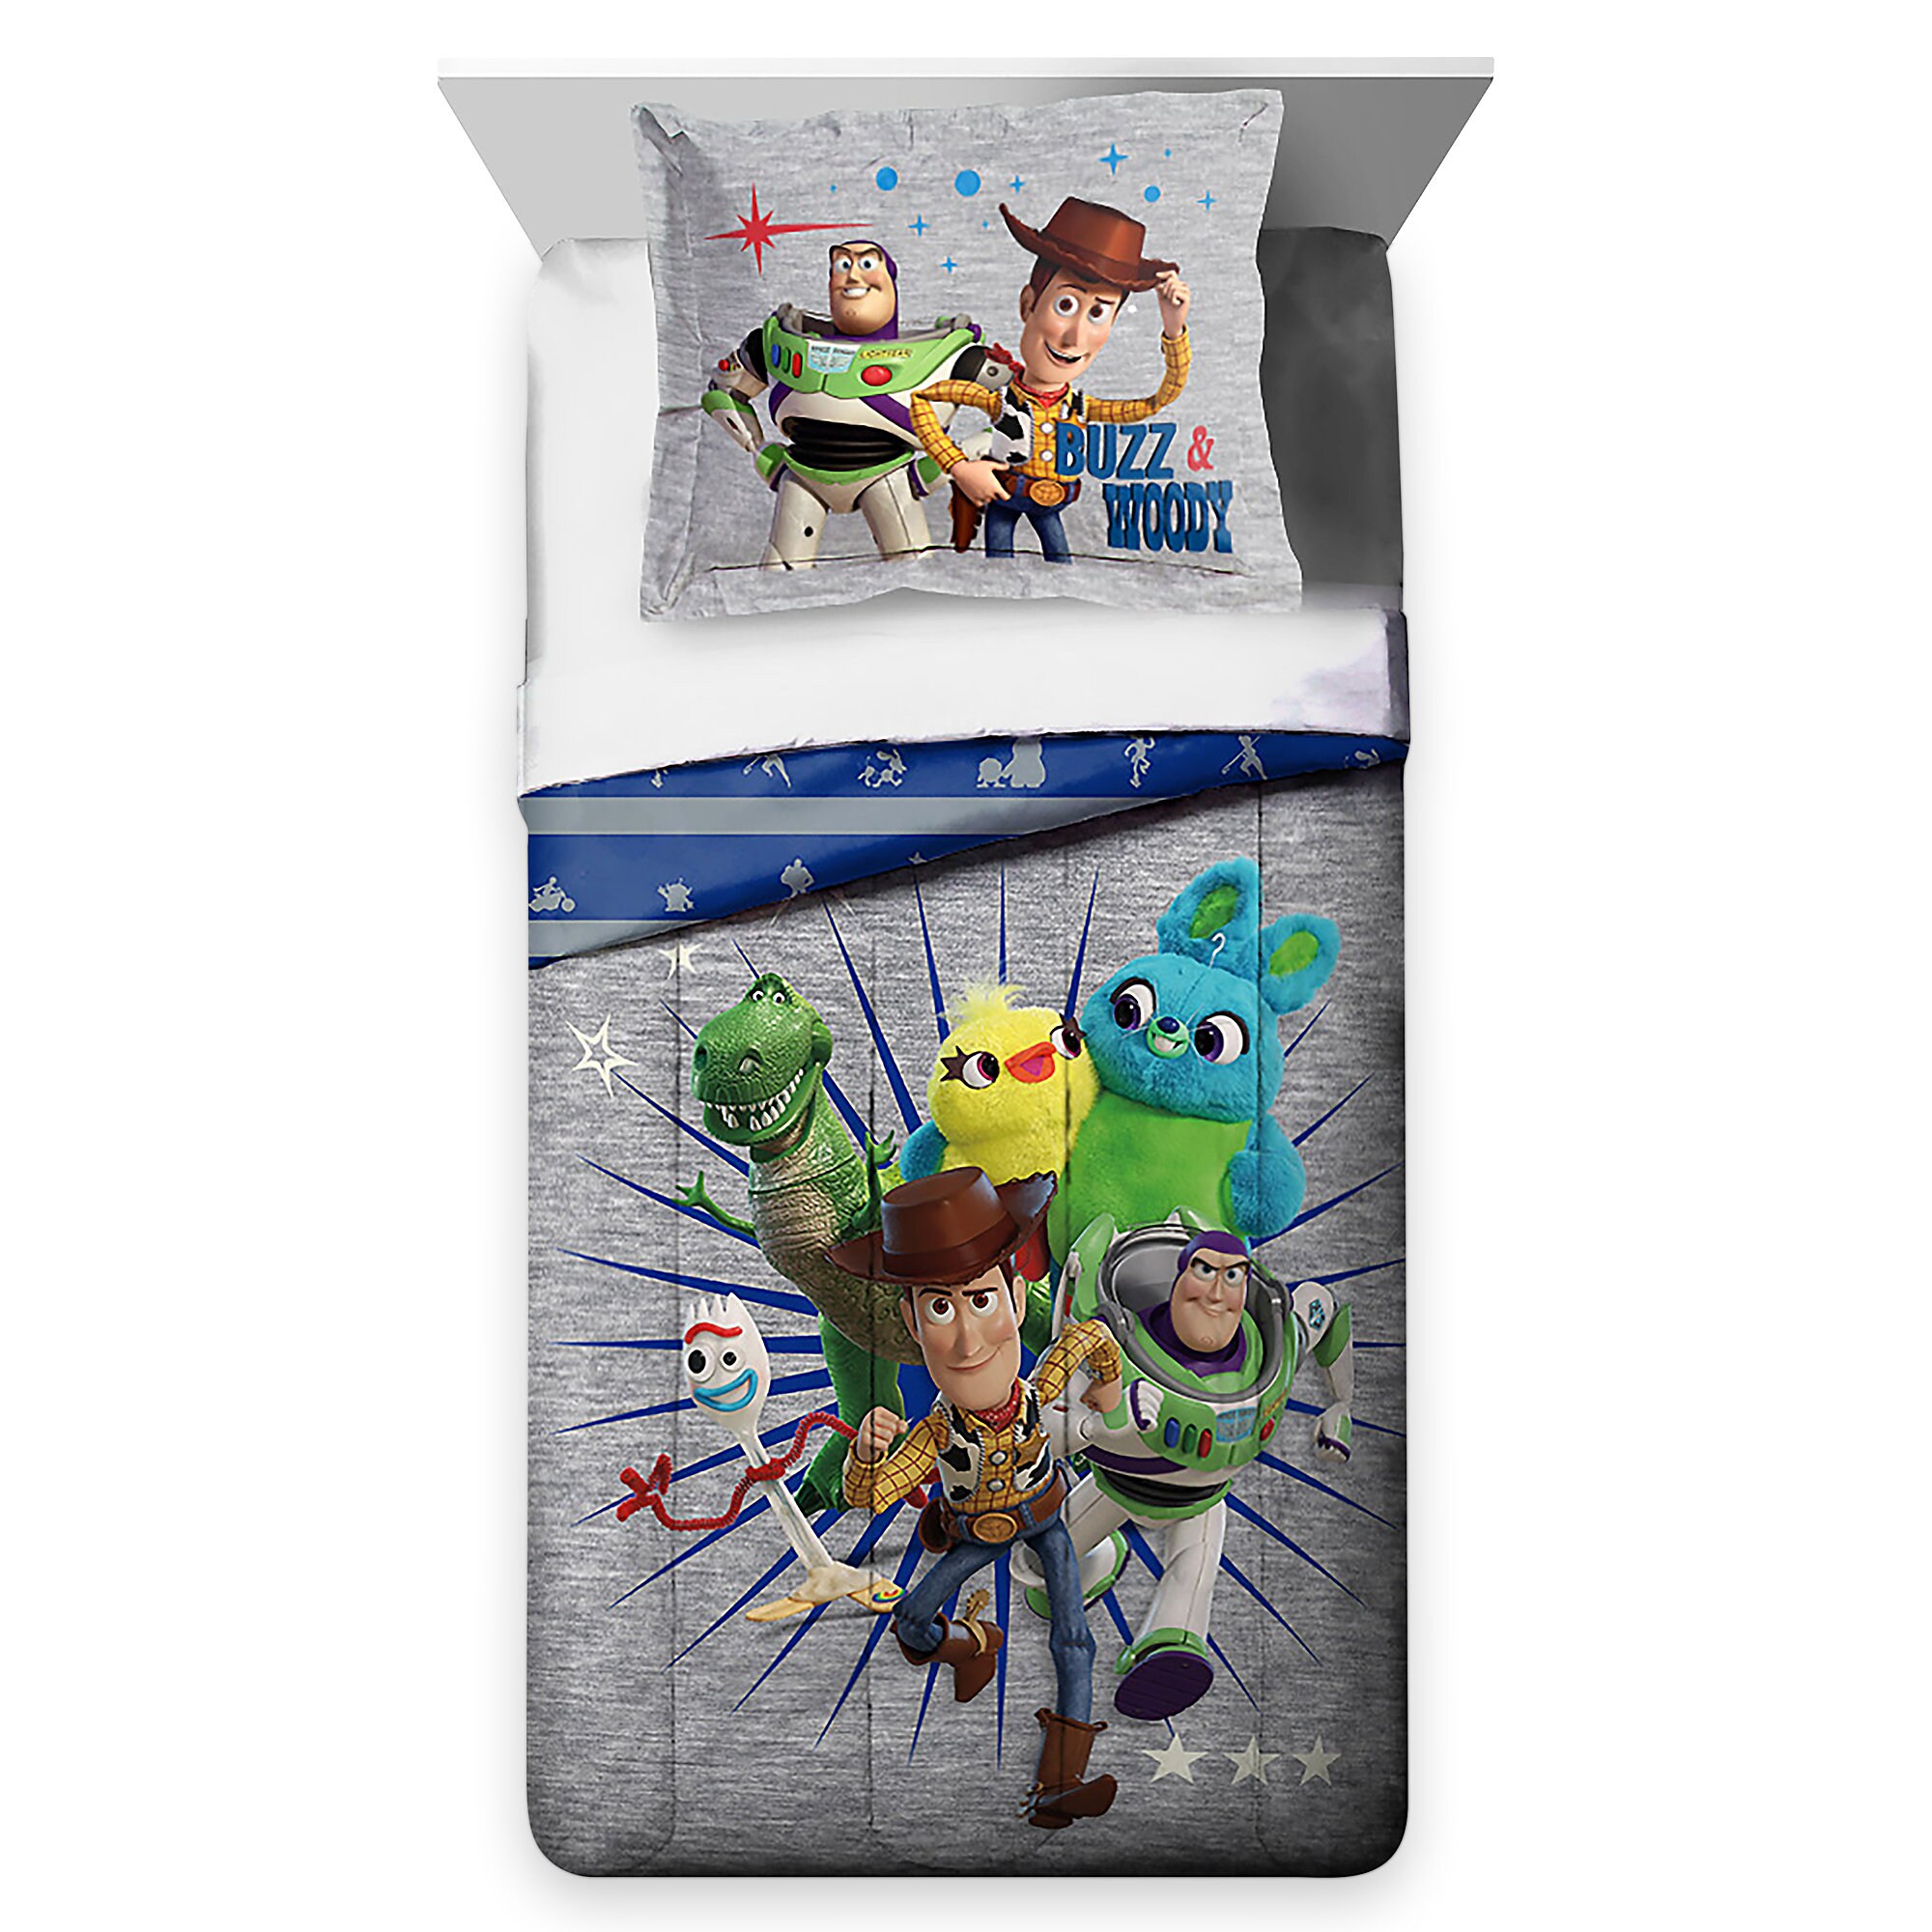 Toy Story 4 Comforter Set - Twin / Full